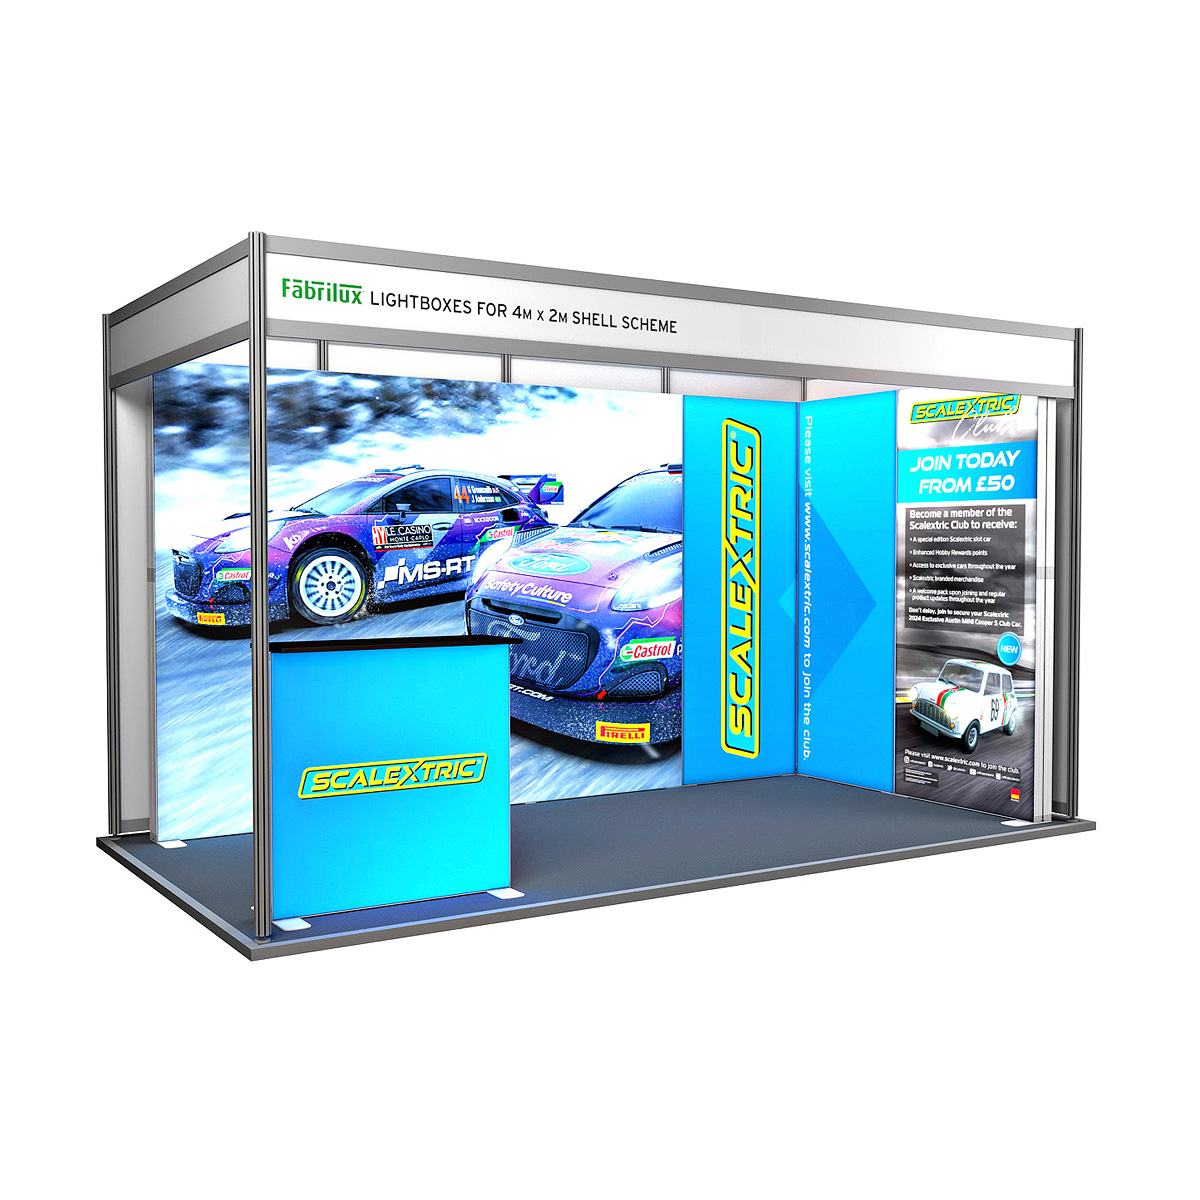 4m x 2m FABRILUX<sup>®</sup> LED Lightboxes Modular Exhibition Stand Shell Scheme